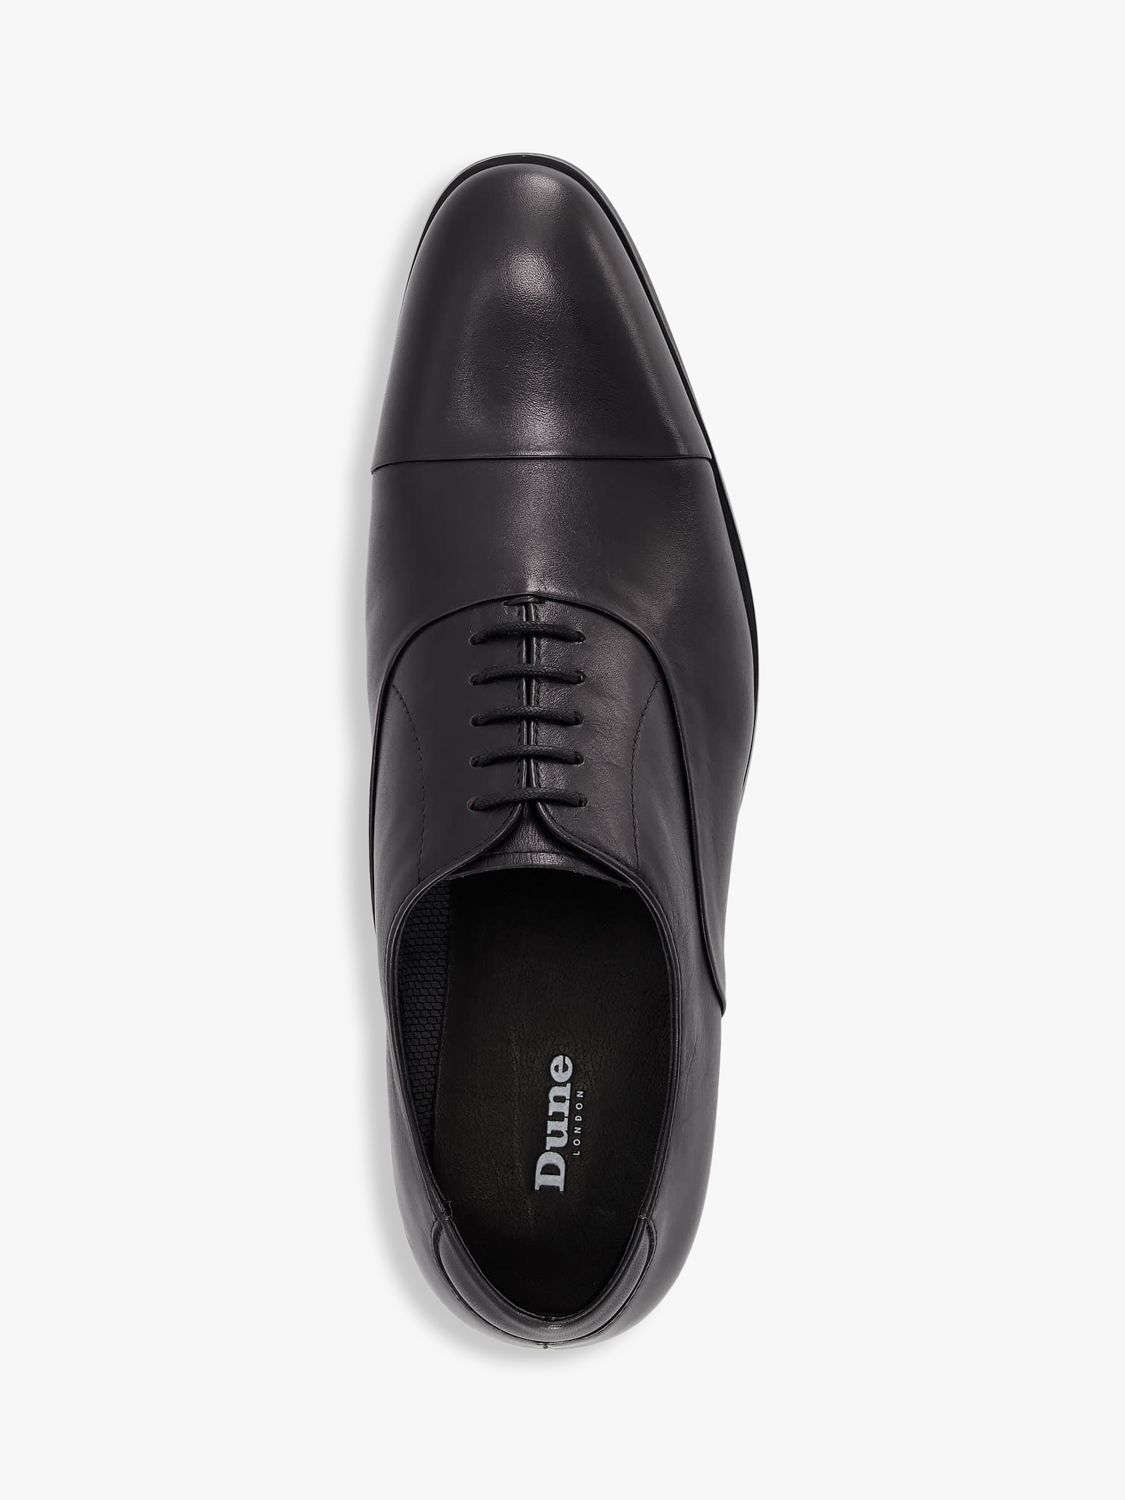 Buy Dune Secrecy Leather Derby Shoes Online at johnlewis.com